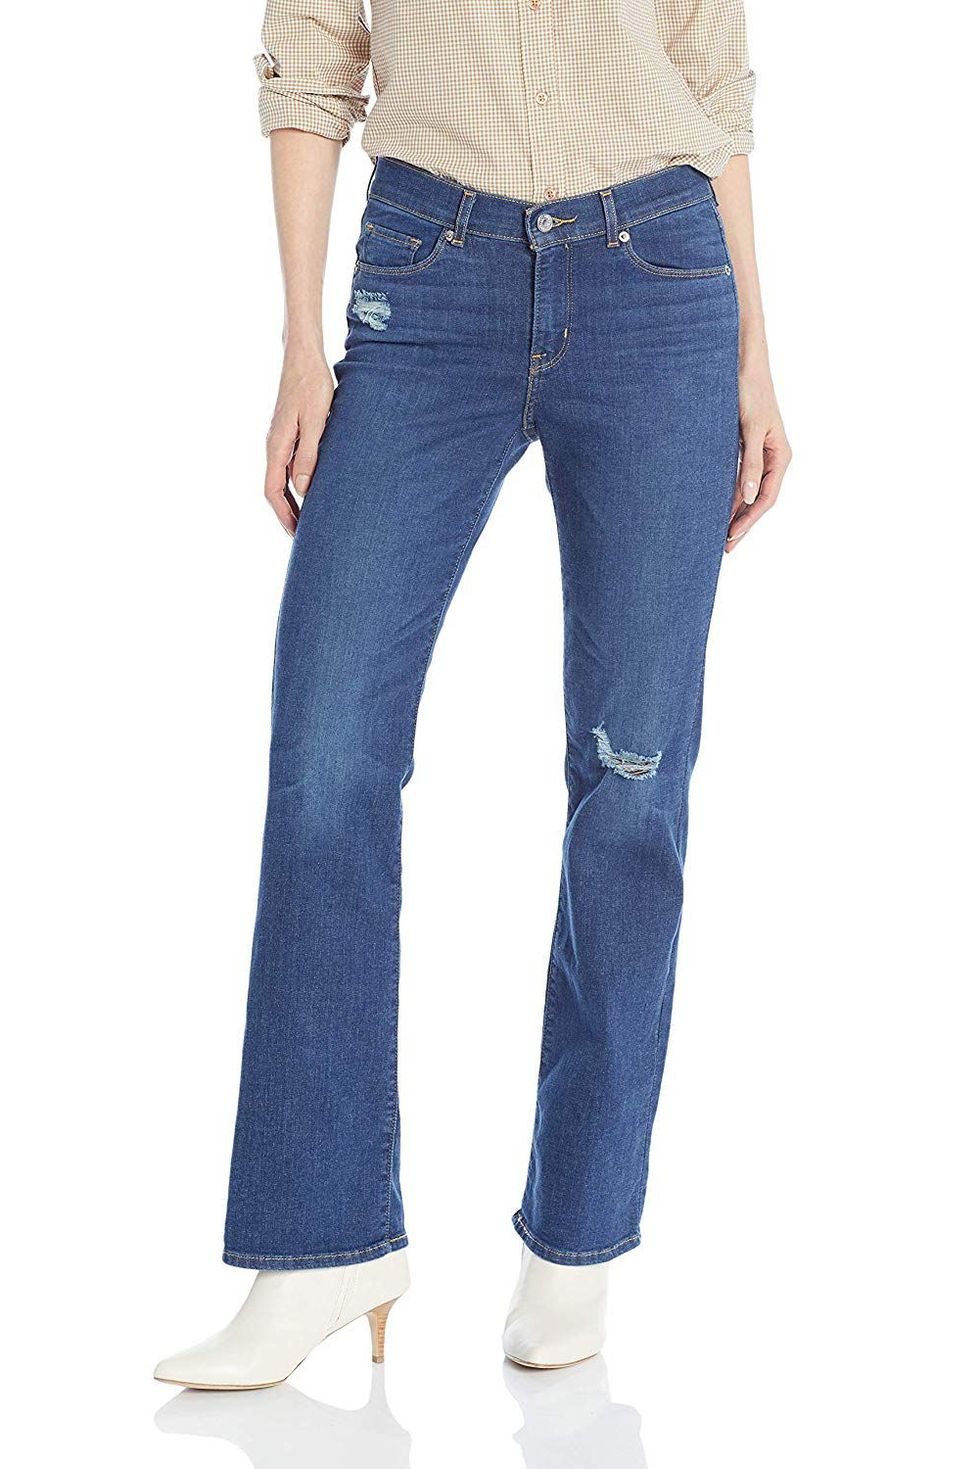 A Pair of Actually Cute Bootcut Jeans 